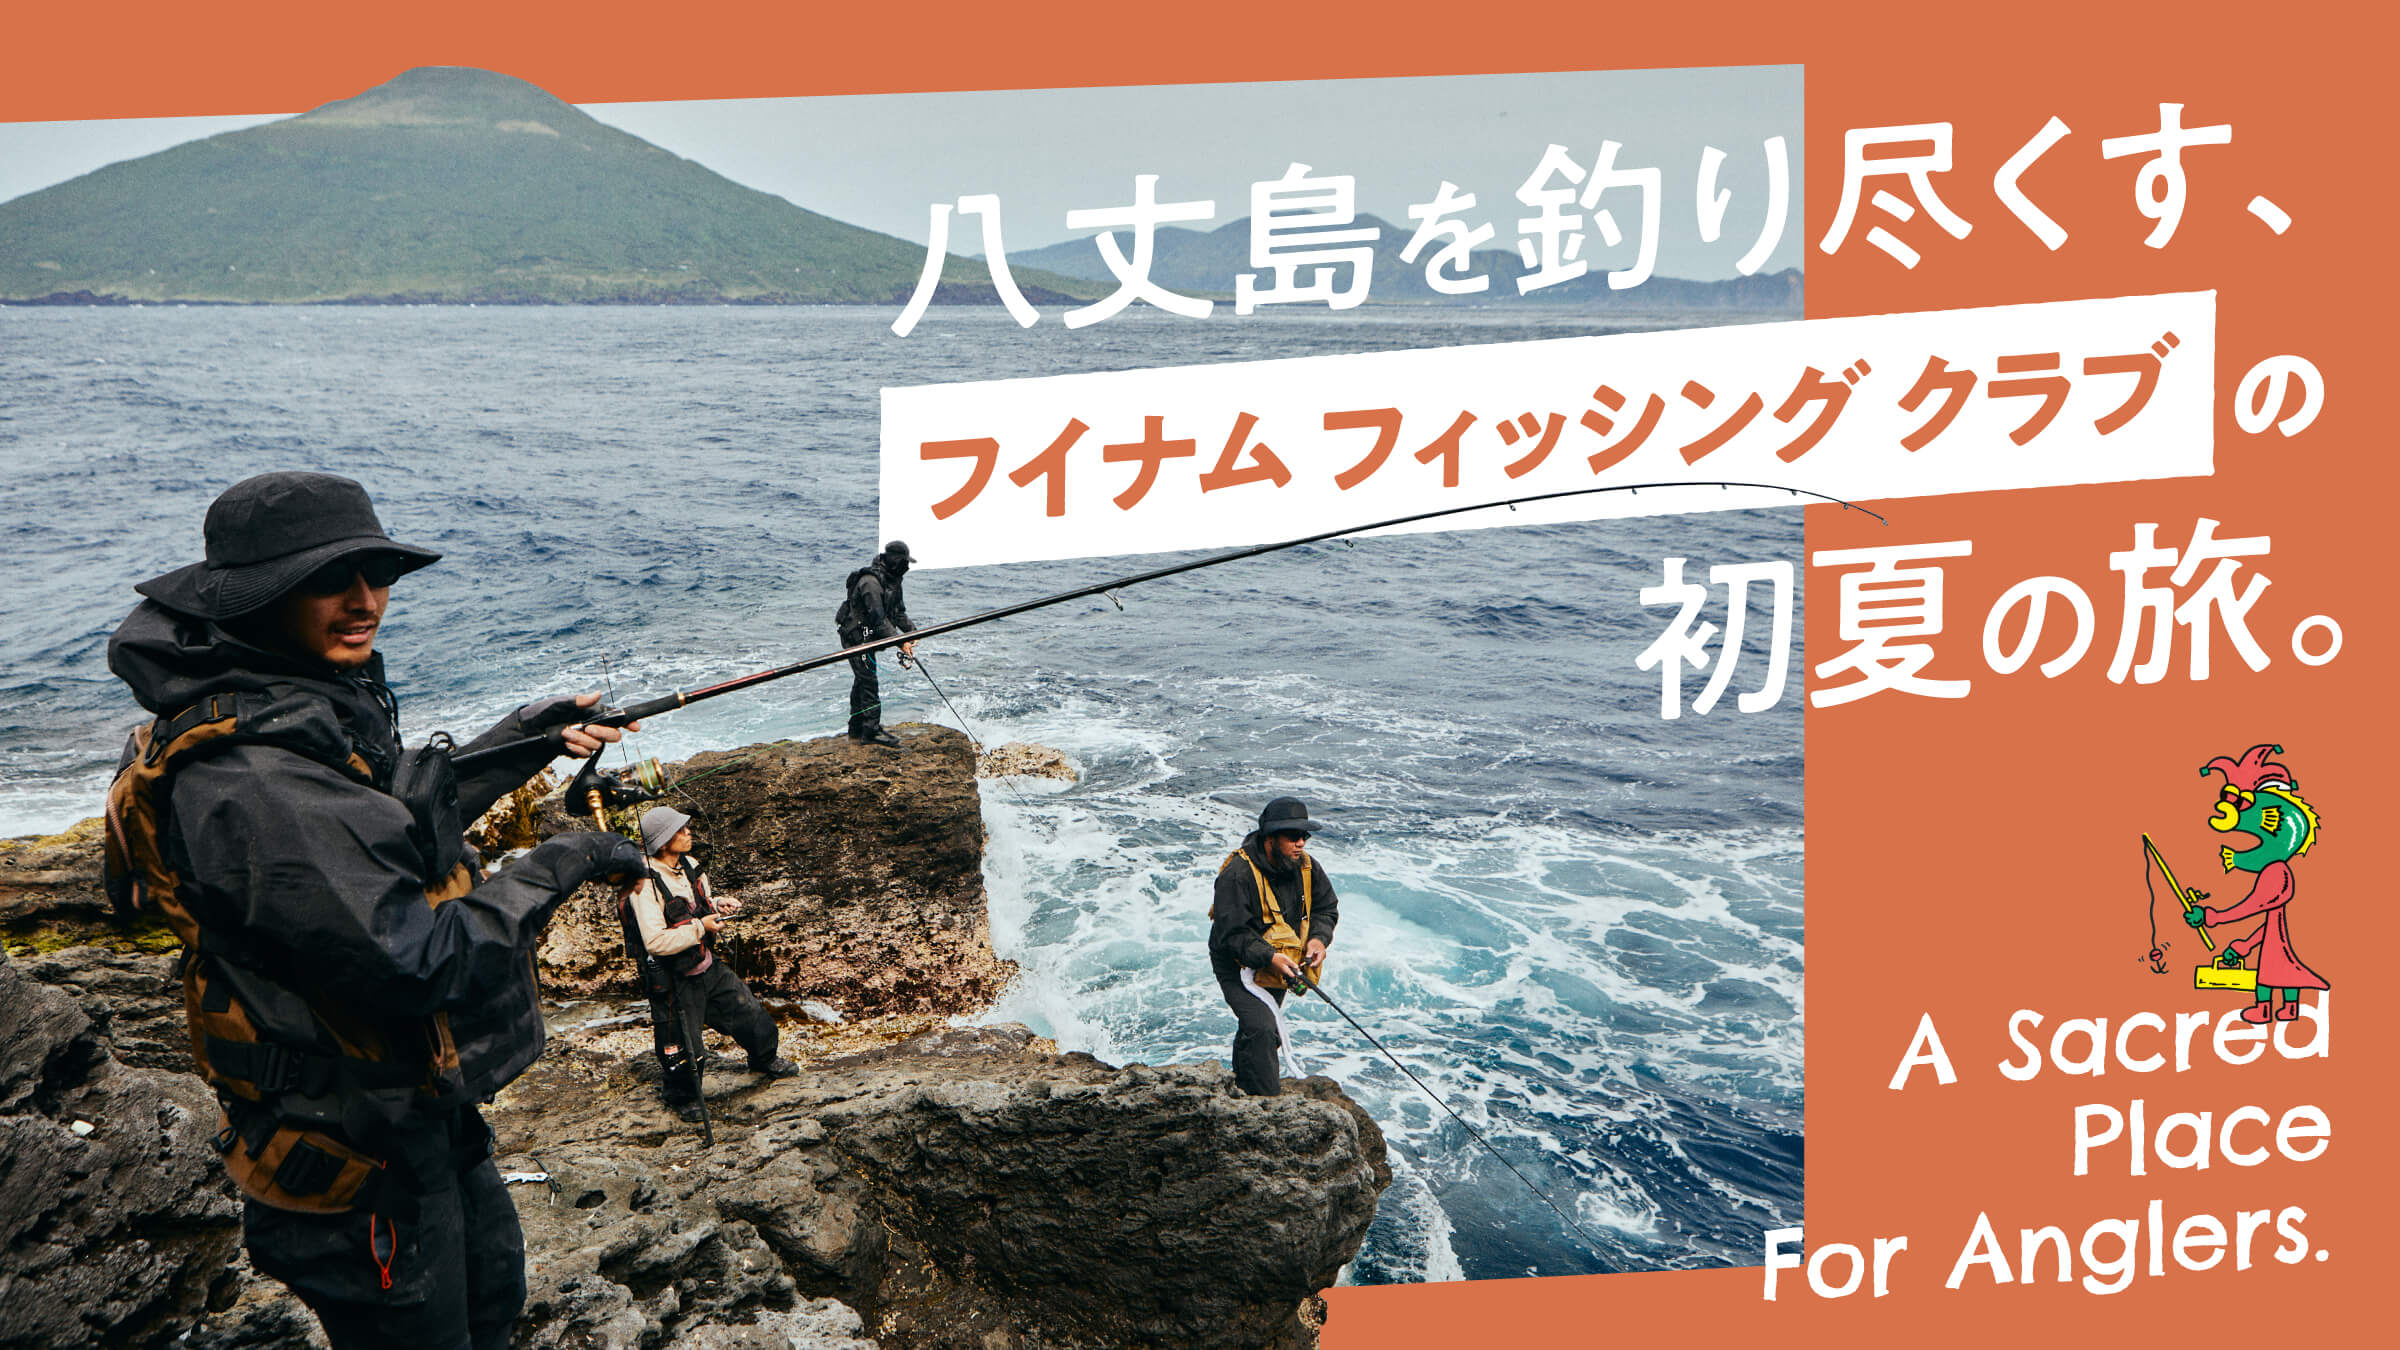 HOUYHNHNM FISHING CLUB's early summer trip to fish all over Hachijojima.